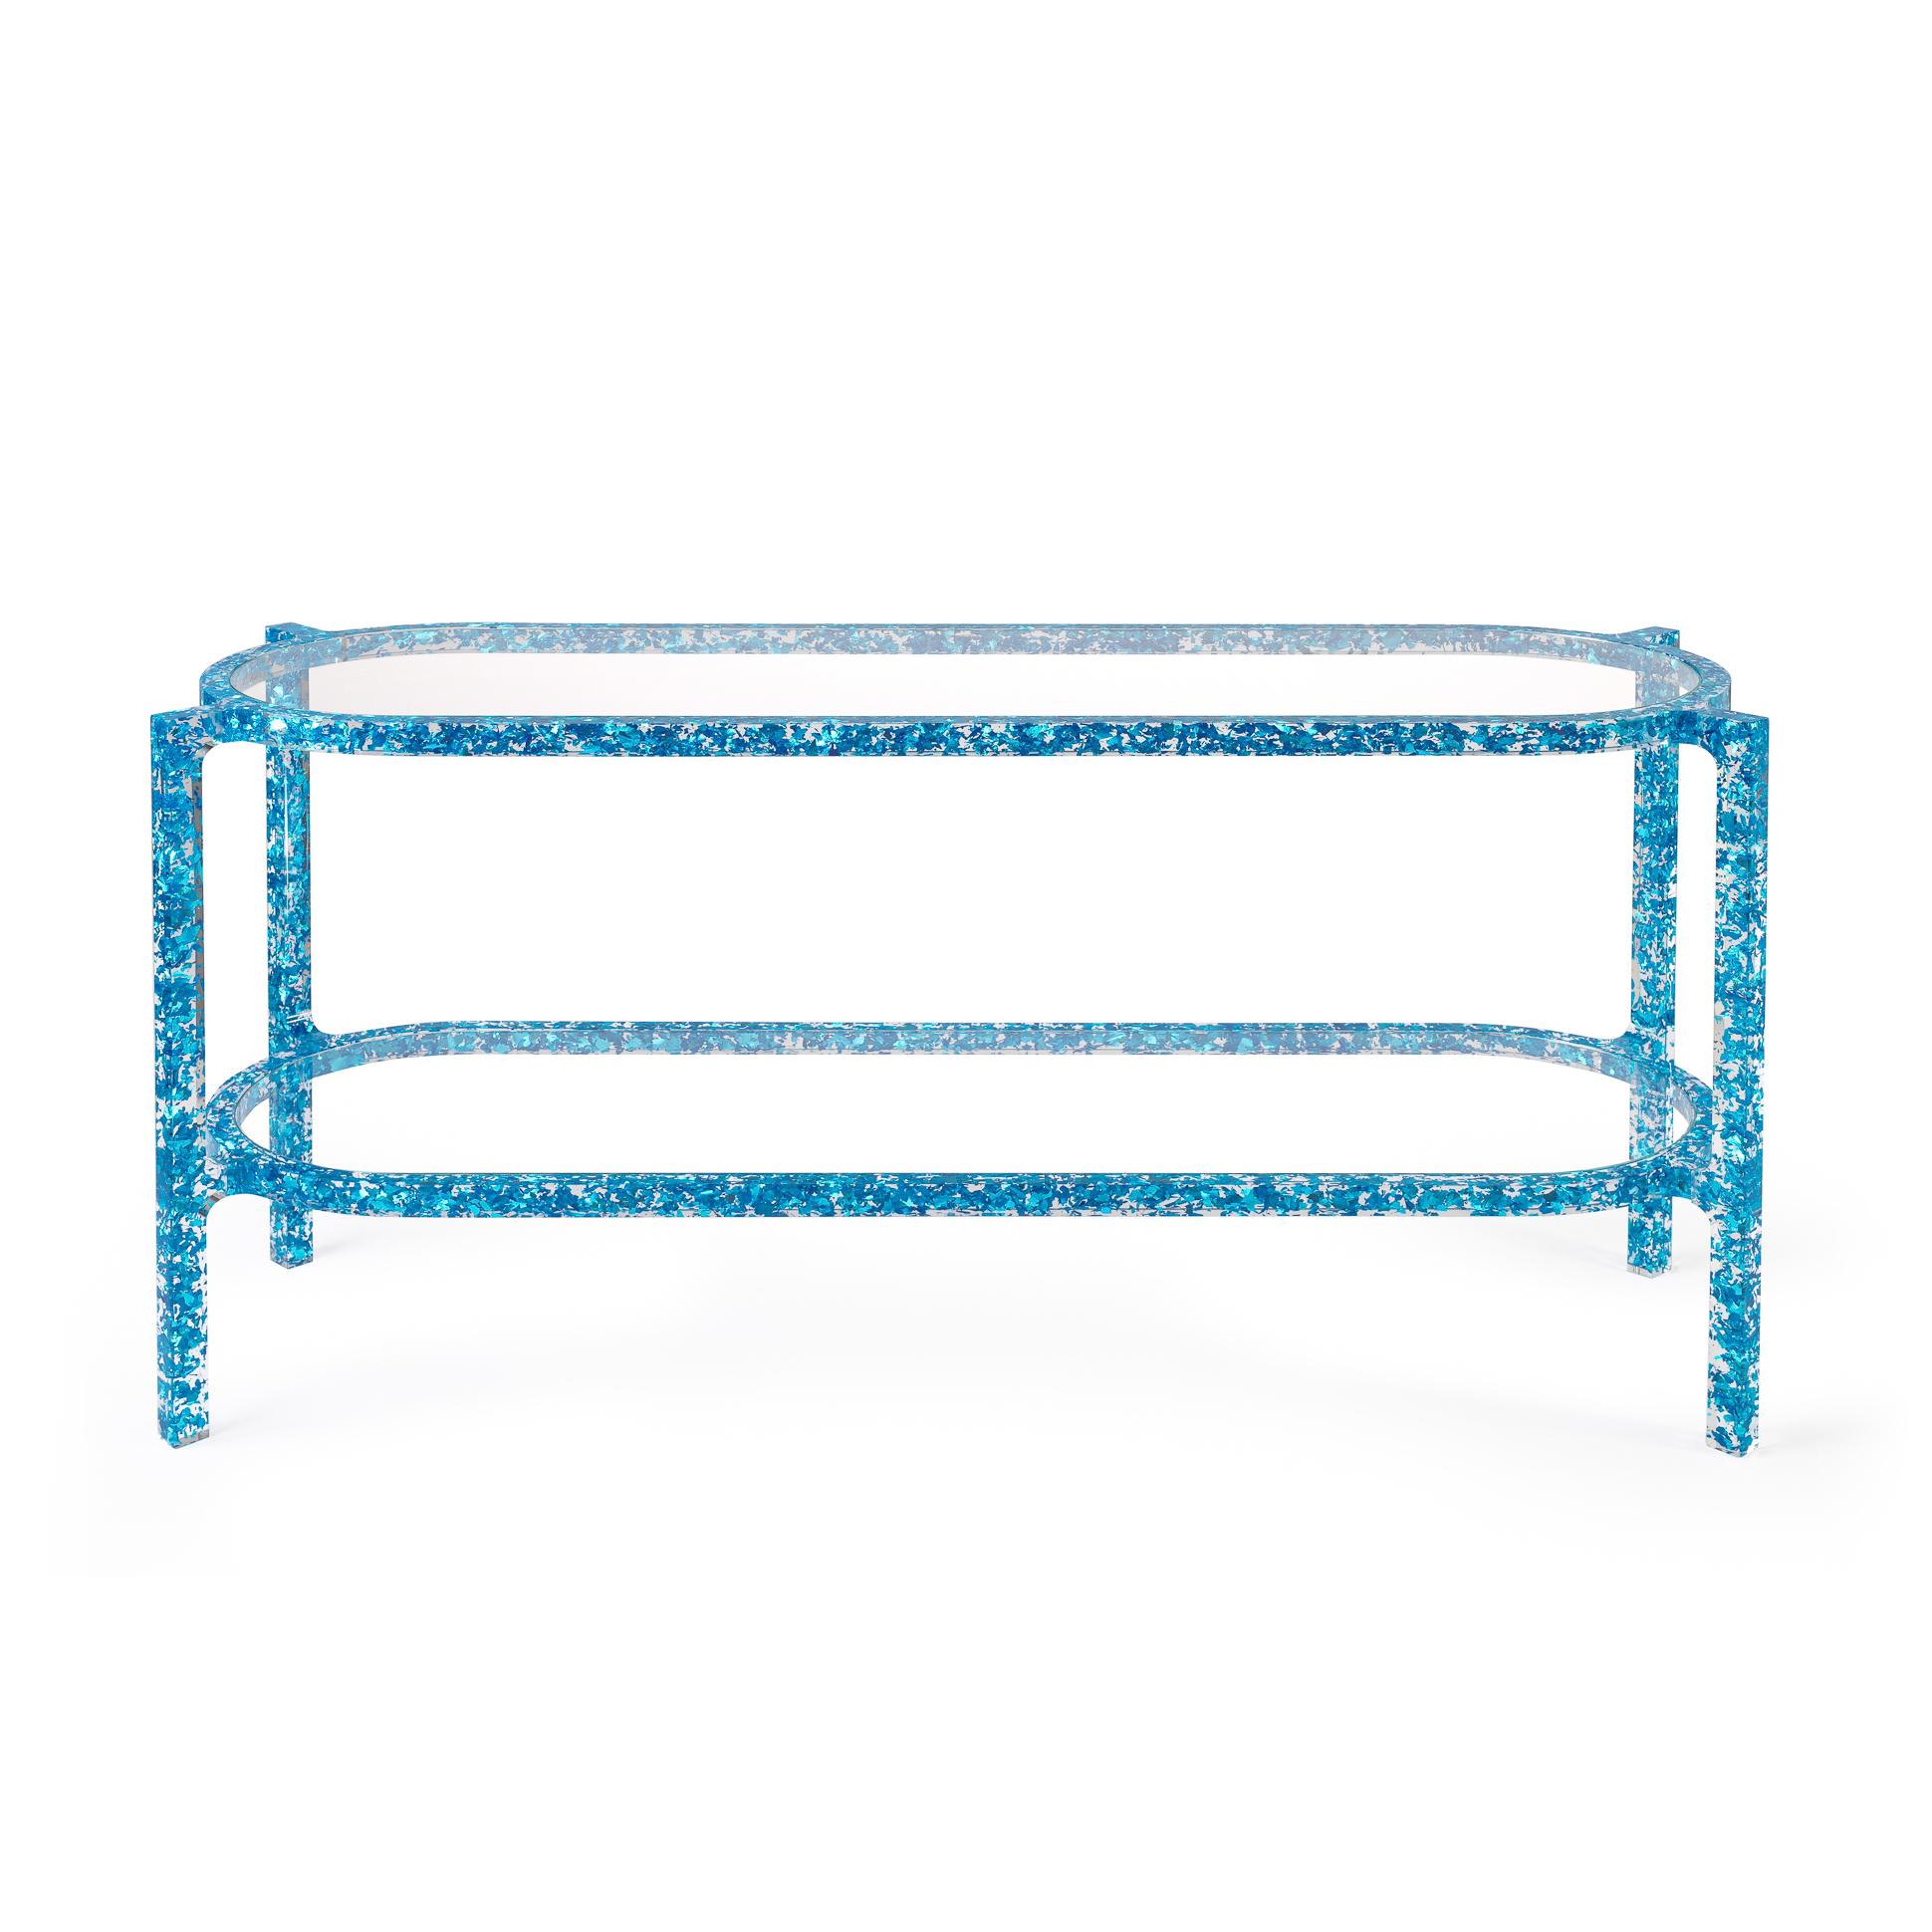 The MIDAS console table is comprised of carefully shredded coloured silver-leaf, all left to randomly float in the table’s crystal clear acrylic frame. Light bounces and reflects off the leaf providing a confetti-like pattern and a unique fragmented